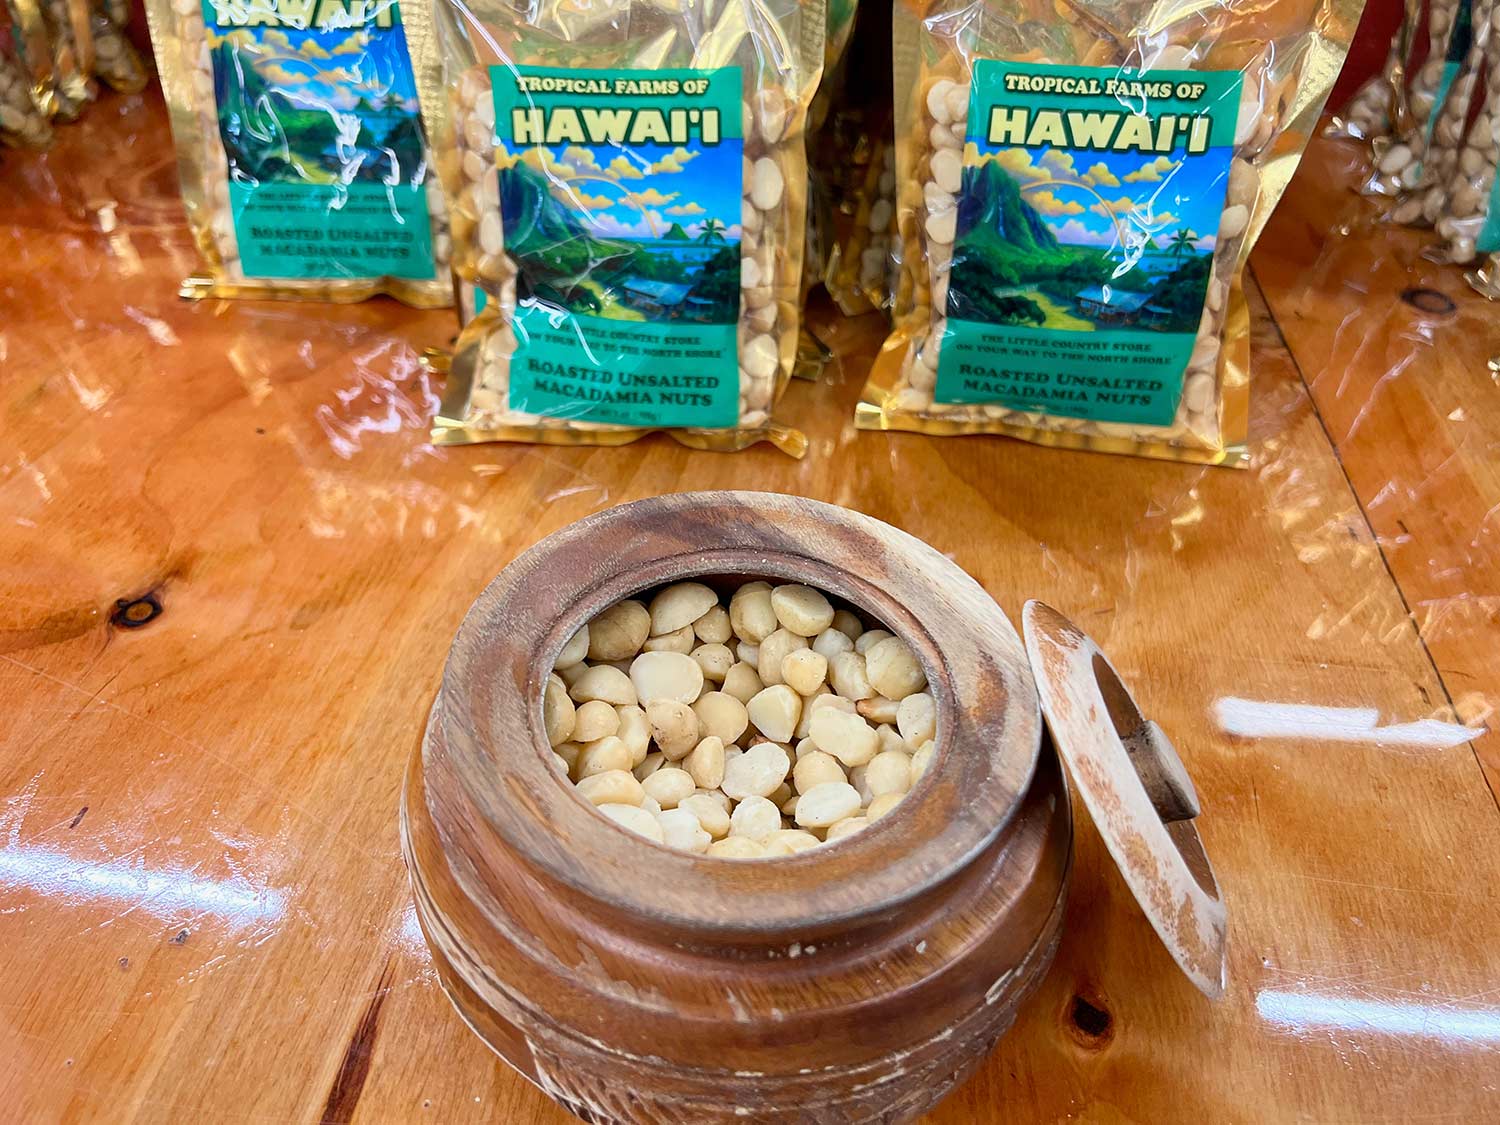 You are currently viewing The History of Hawaii’s Macadamia Nuts and Oahu’s Tropical Farms